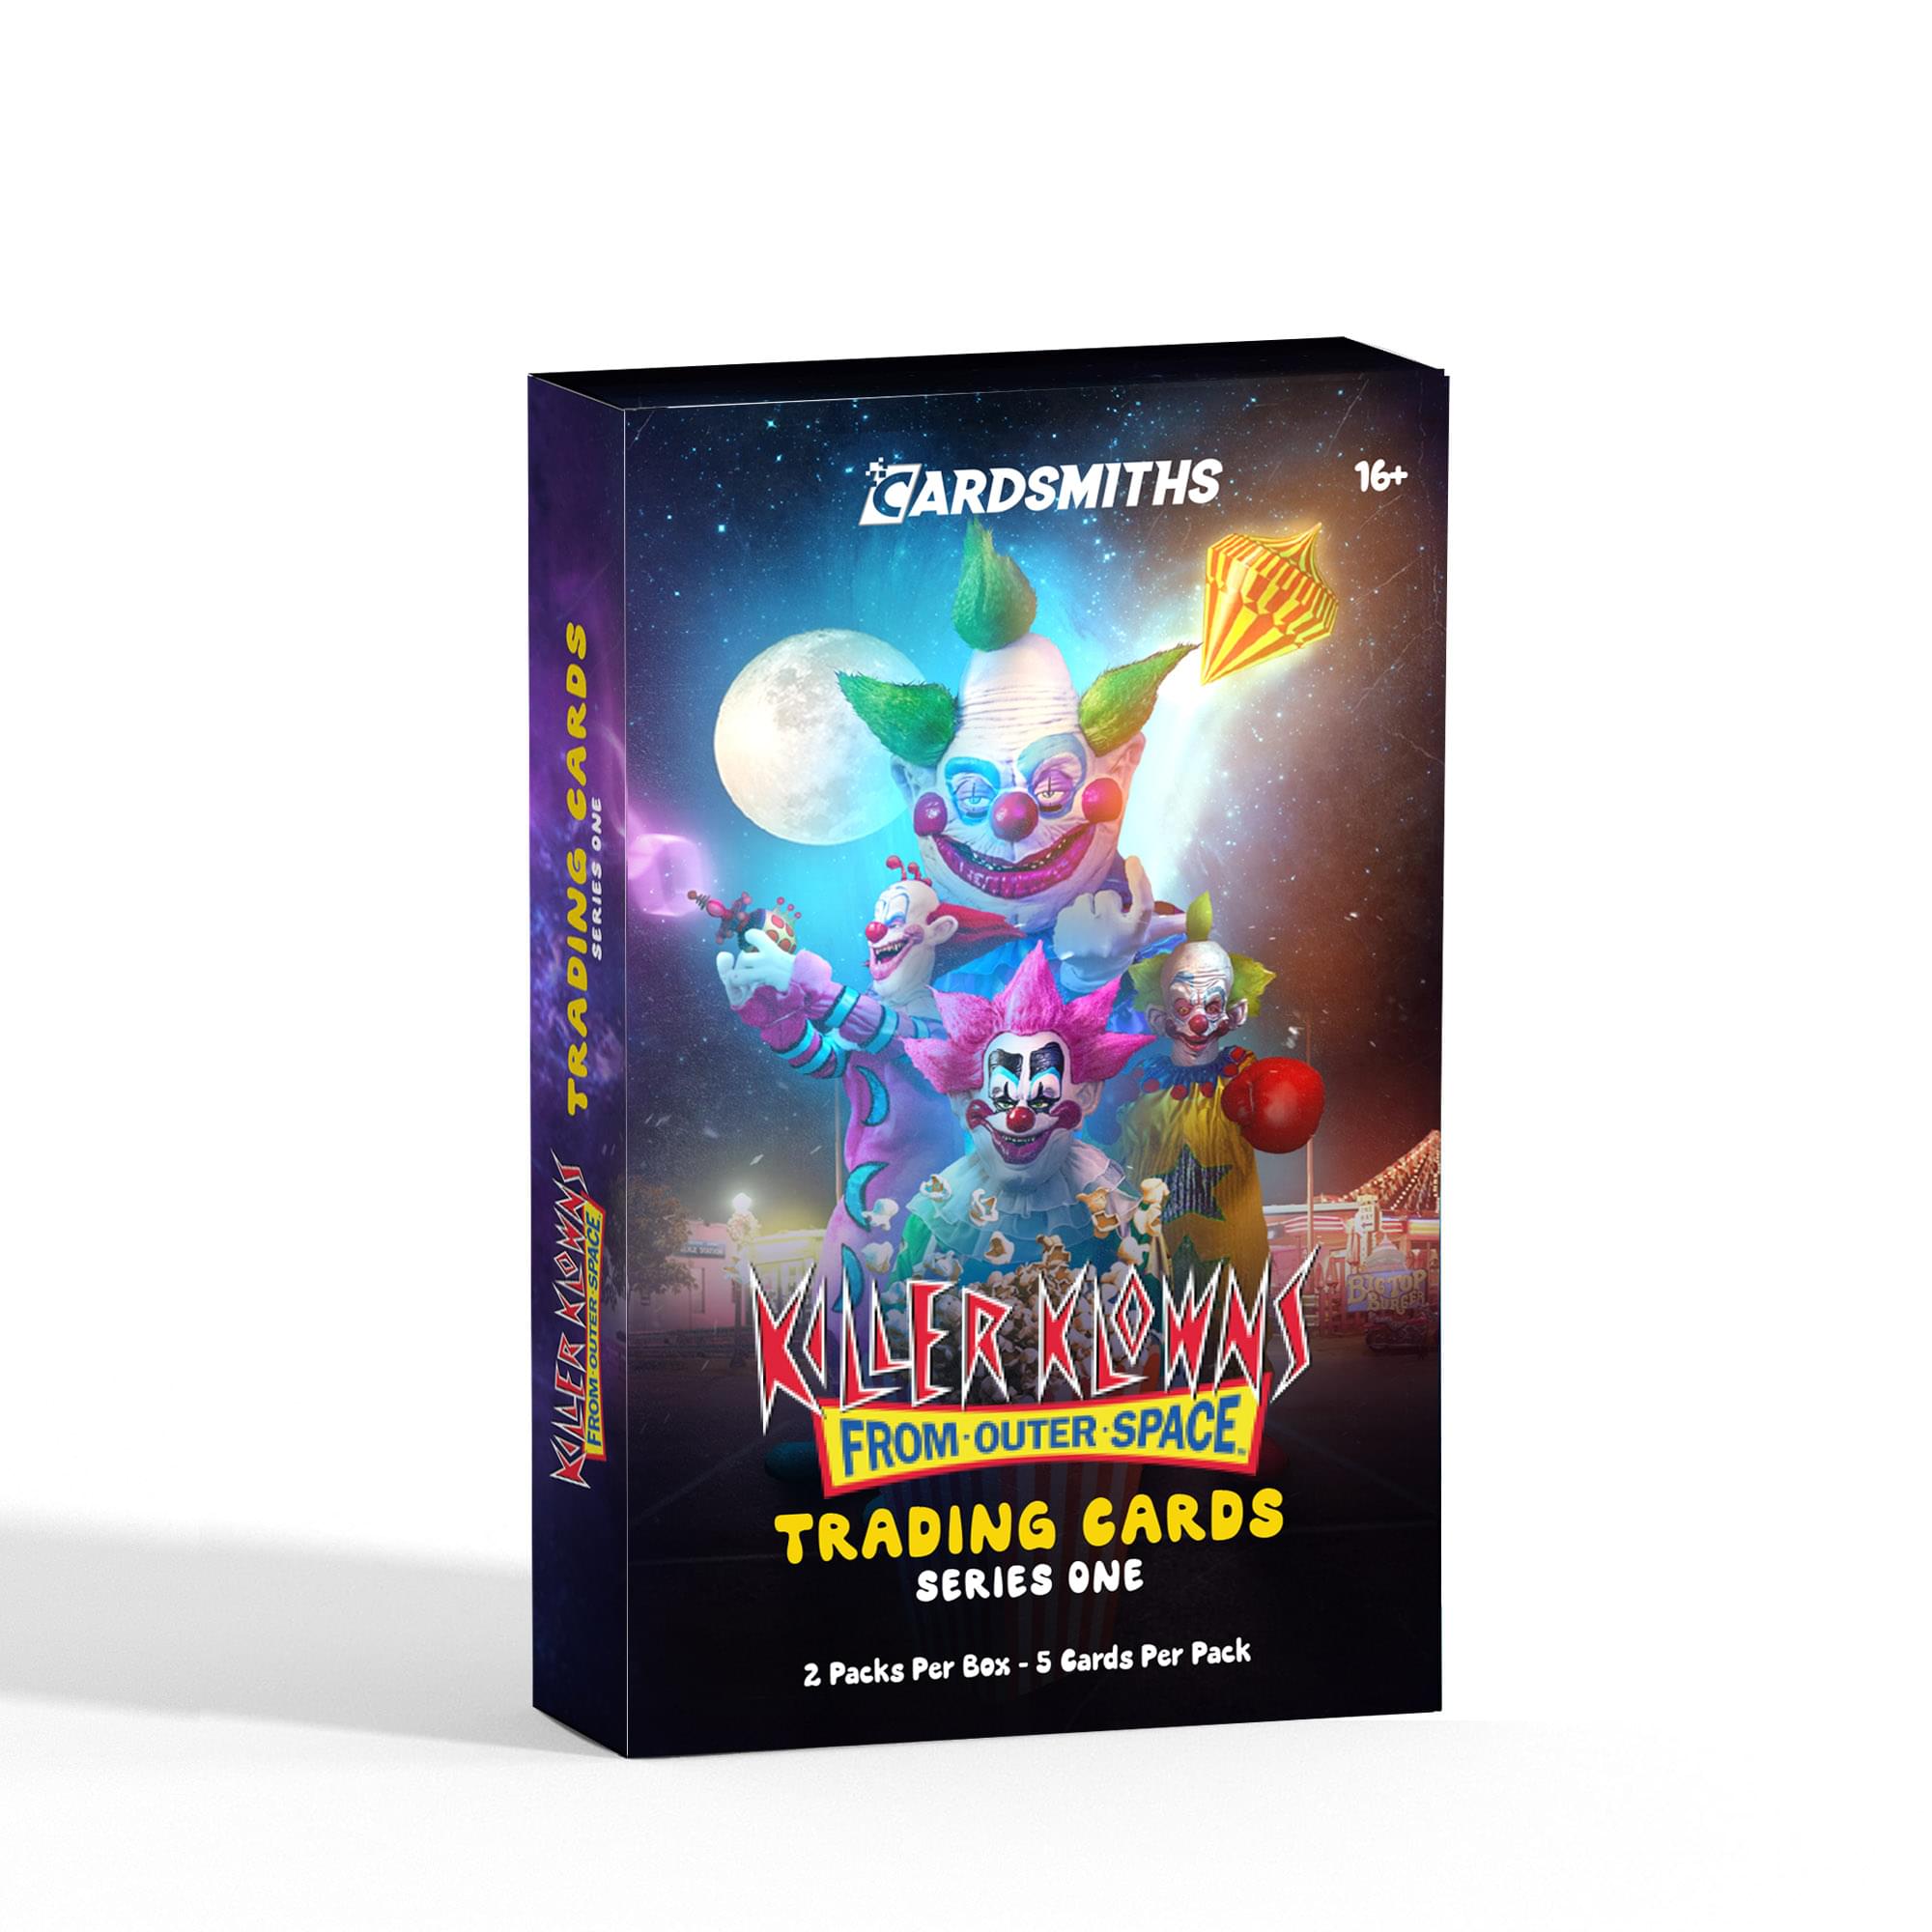 Killer Klowns Trading Cards - Series 1 , Collector's Box 2 Packs